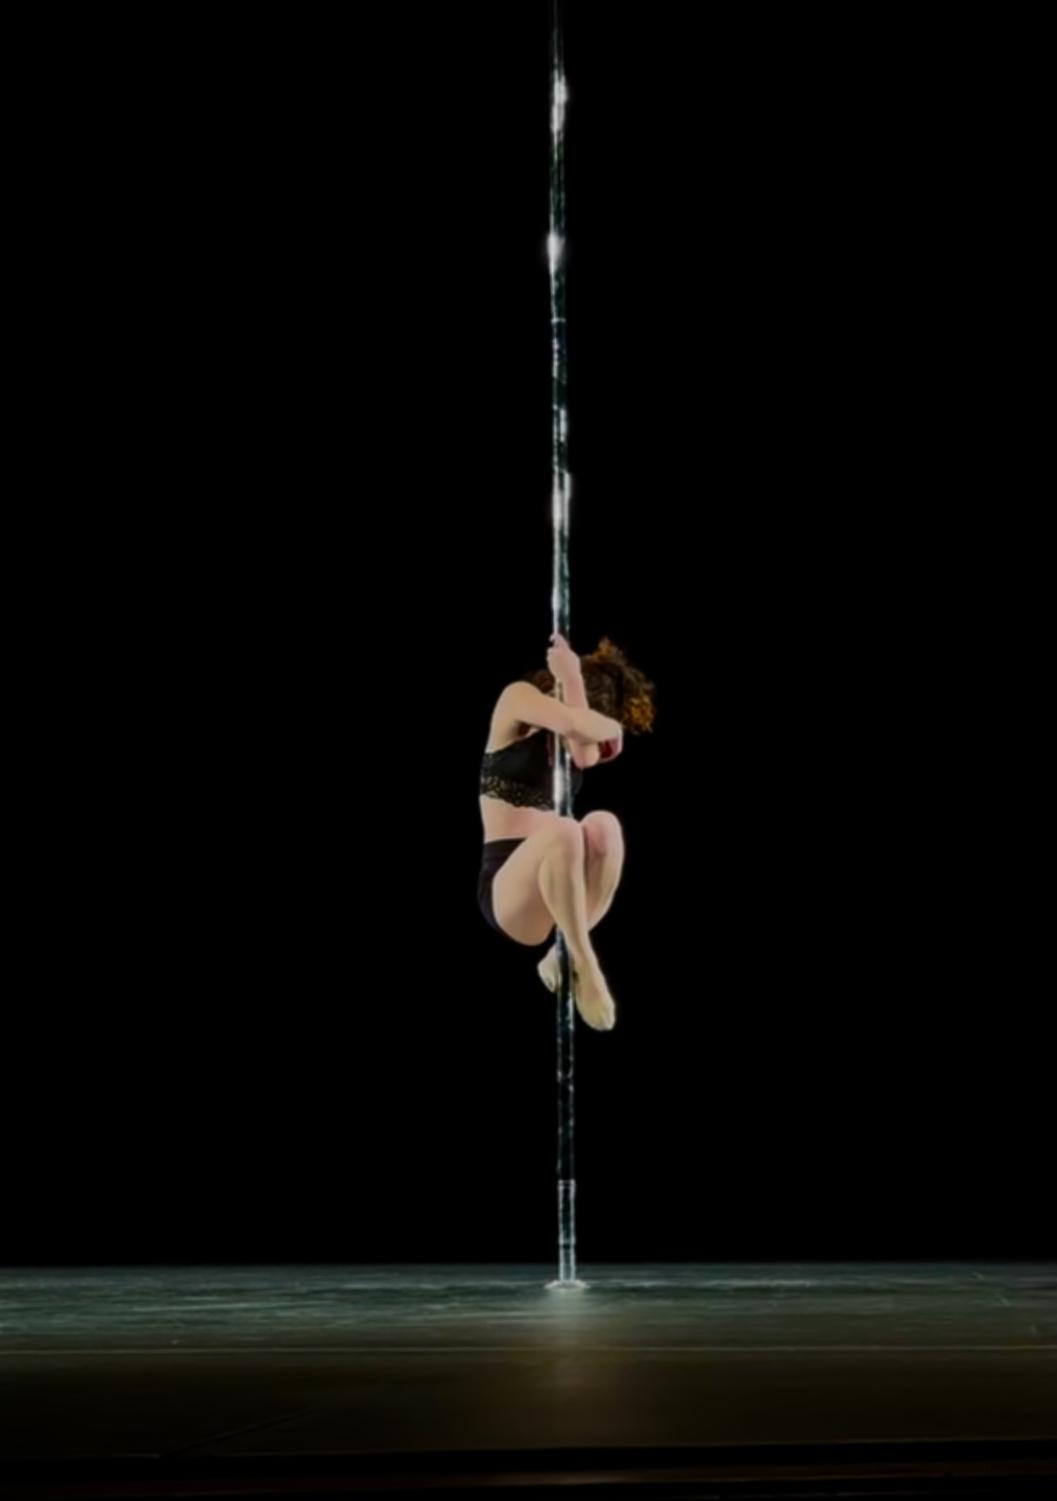 https://tatler.lakesideschool.org/wp-content/uploads/2023/02/Pole-Dancing-For-Cassia-W.-23-pole-dancing-is-a-creative-outlet-that-provides-a-sense-of-relief.Cassia-W.-23.jpg